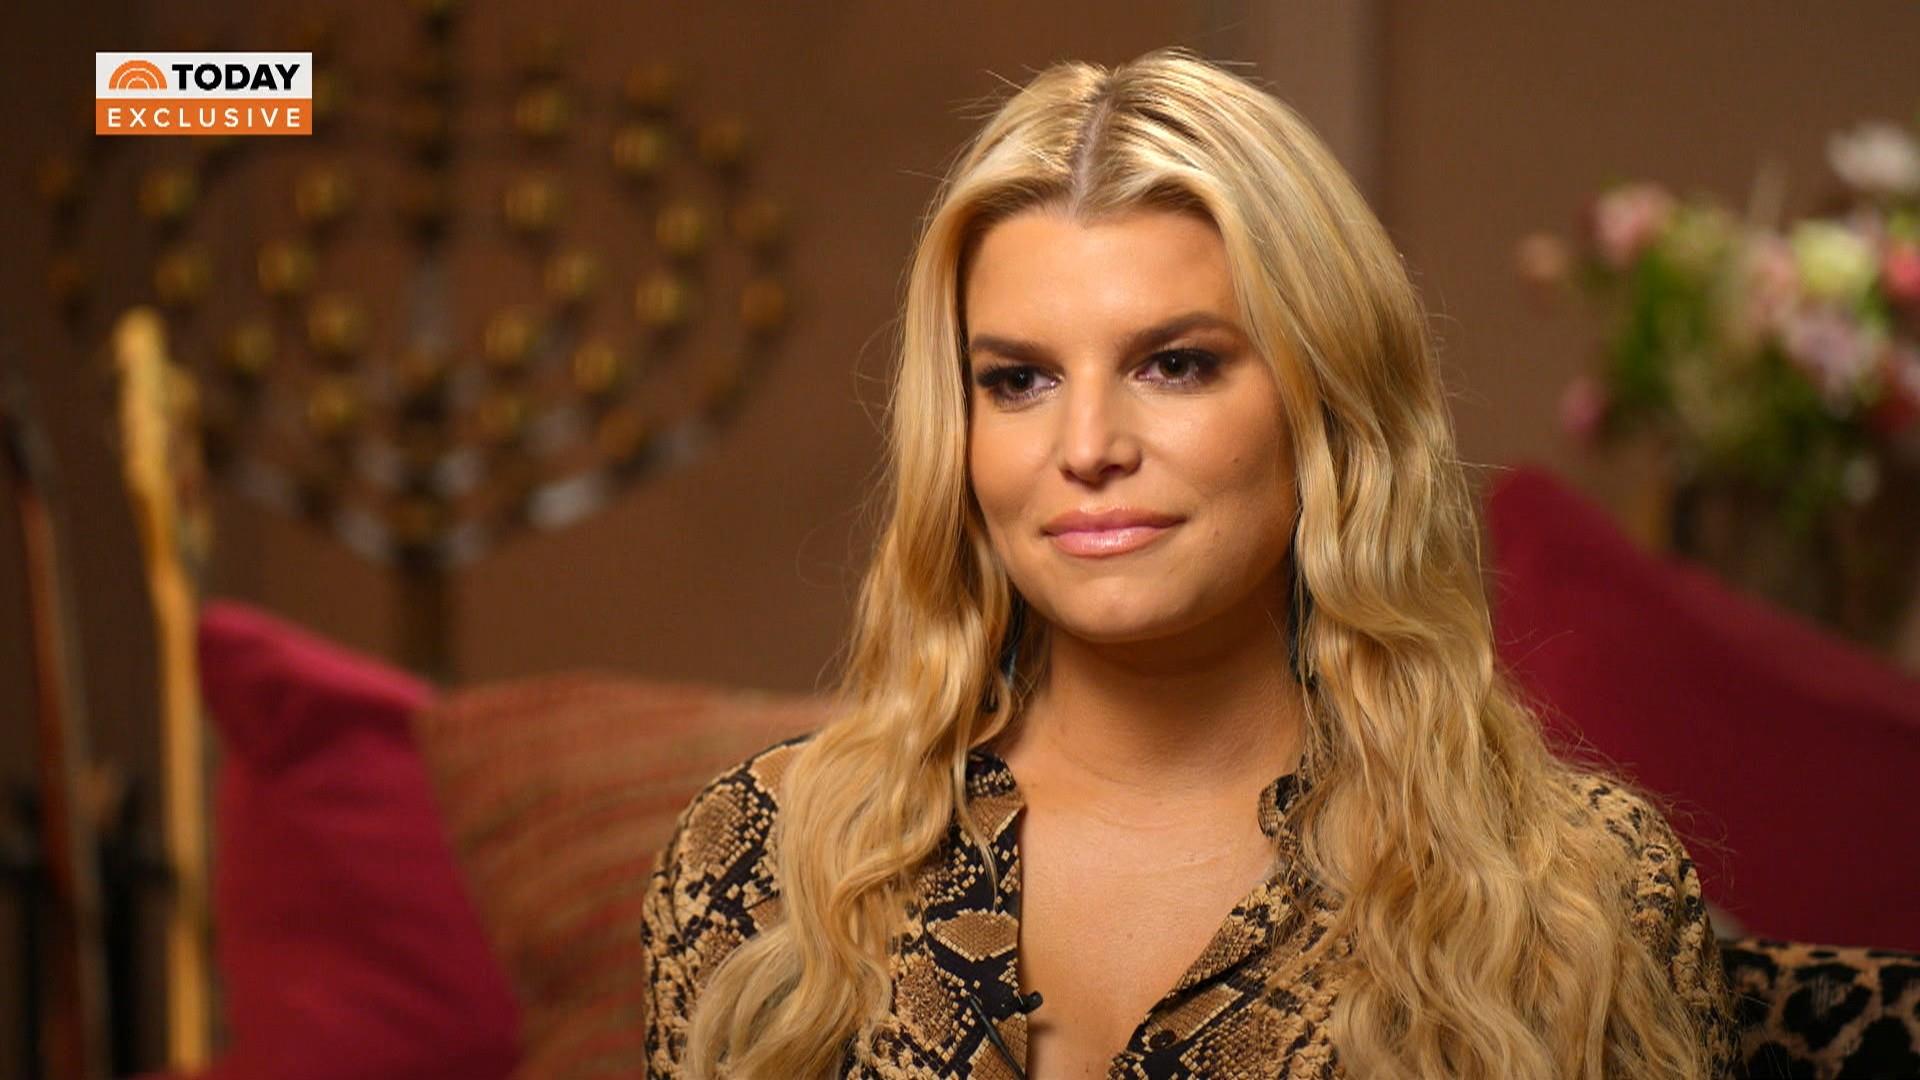 Jessica Simpson speaks out about her alcoholism, relationships